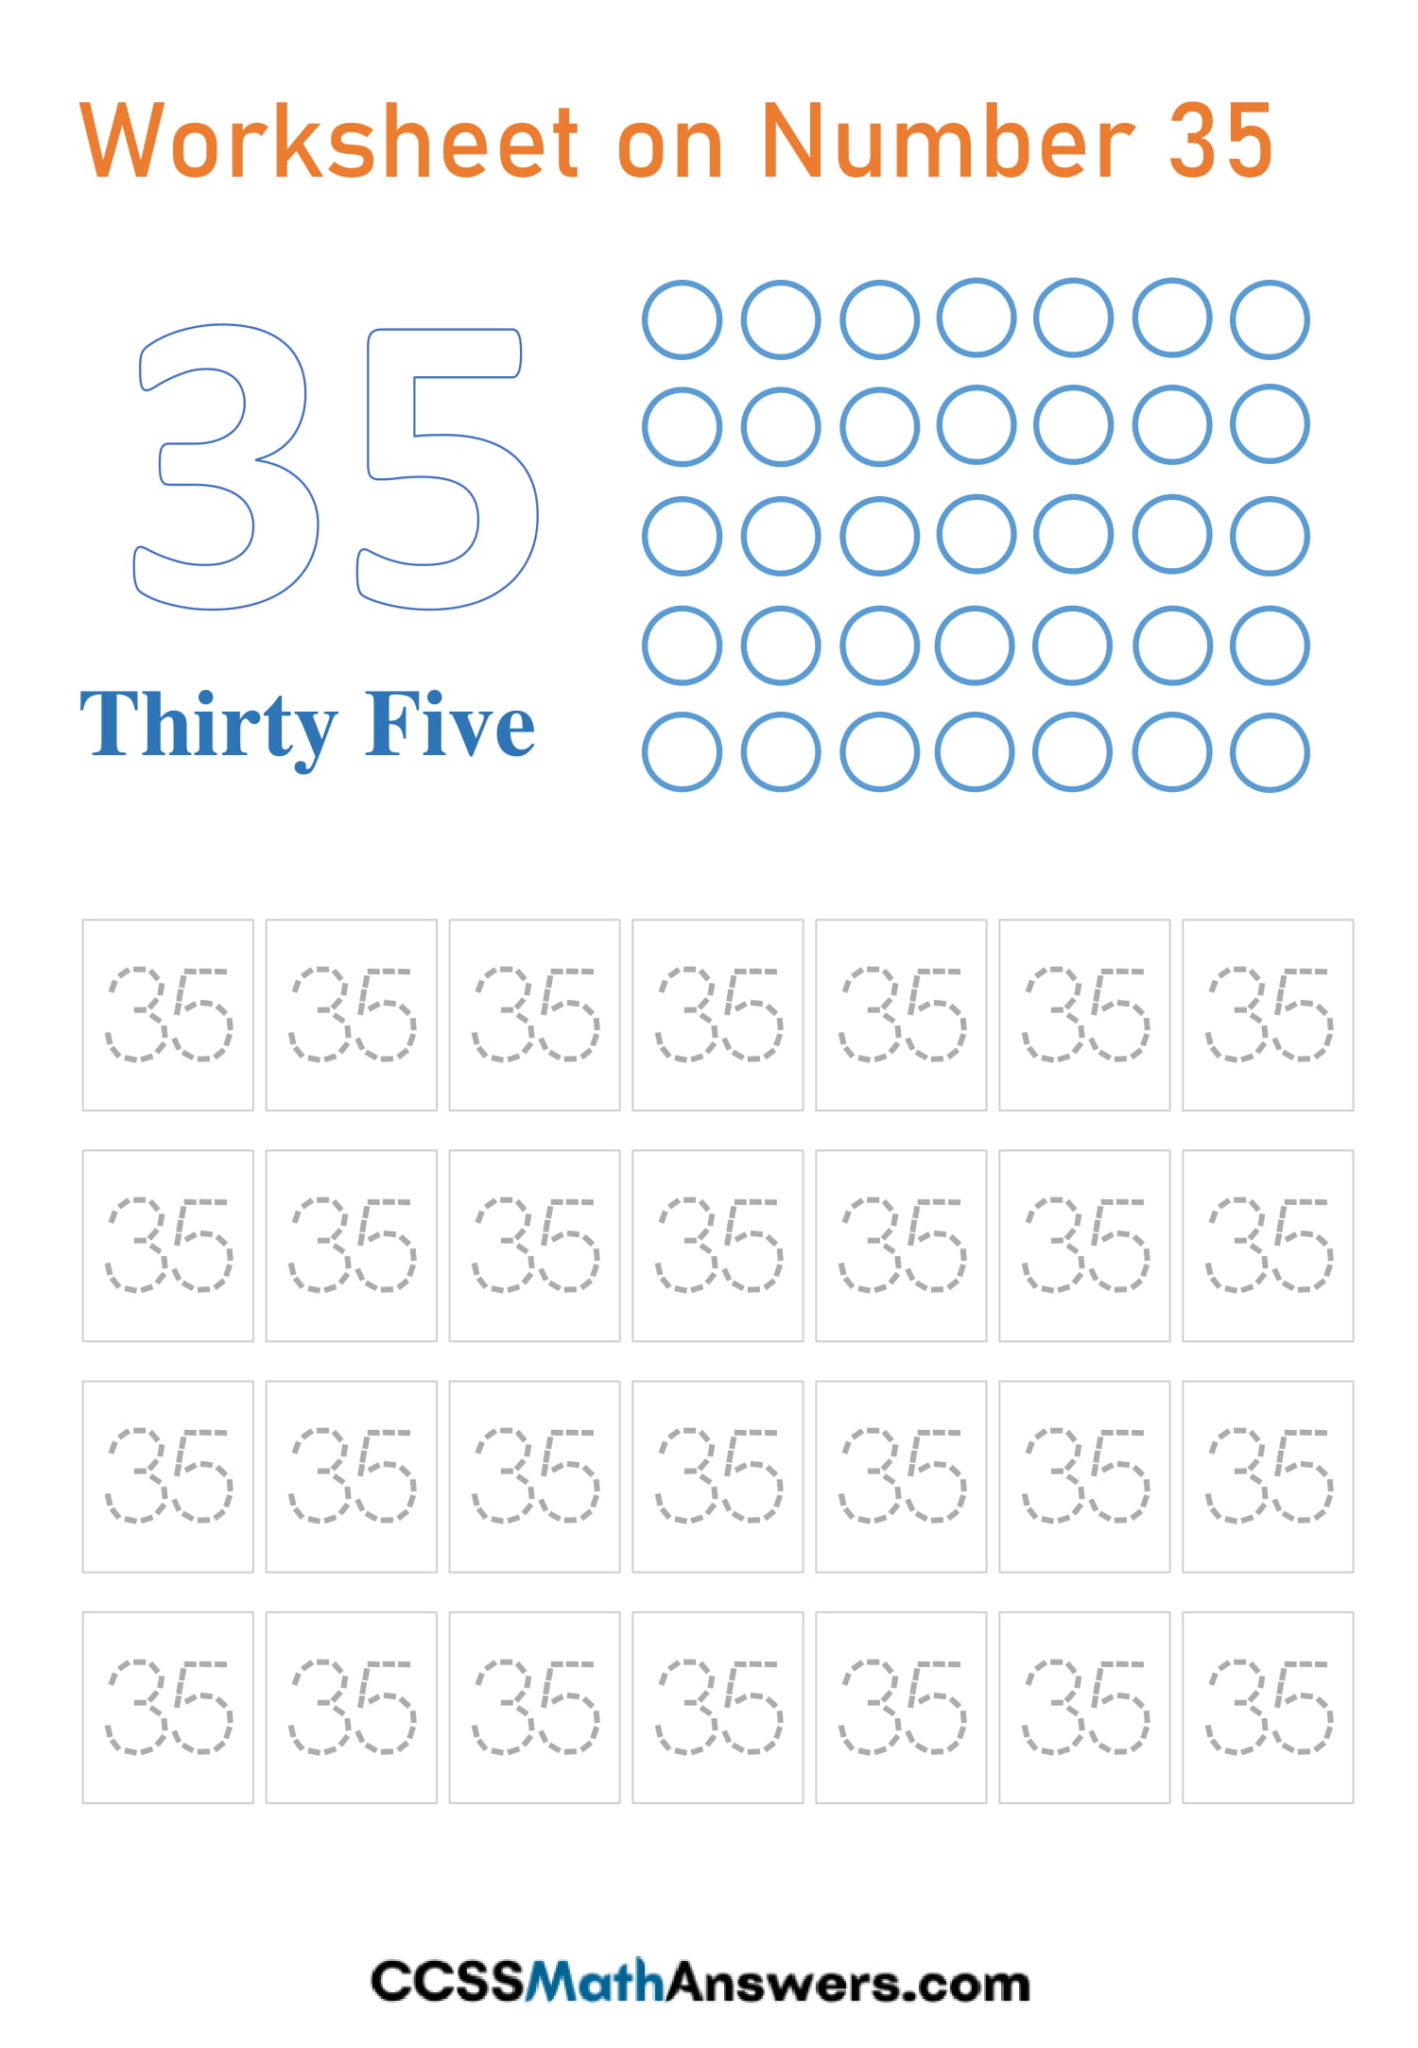 Worksheet On Number 35 Free Printable Tracing Counting Recognition Activities On Number 35